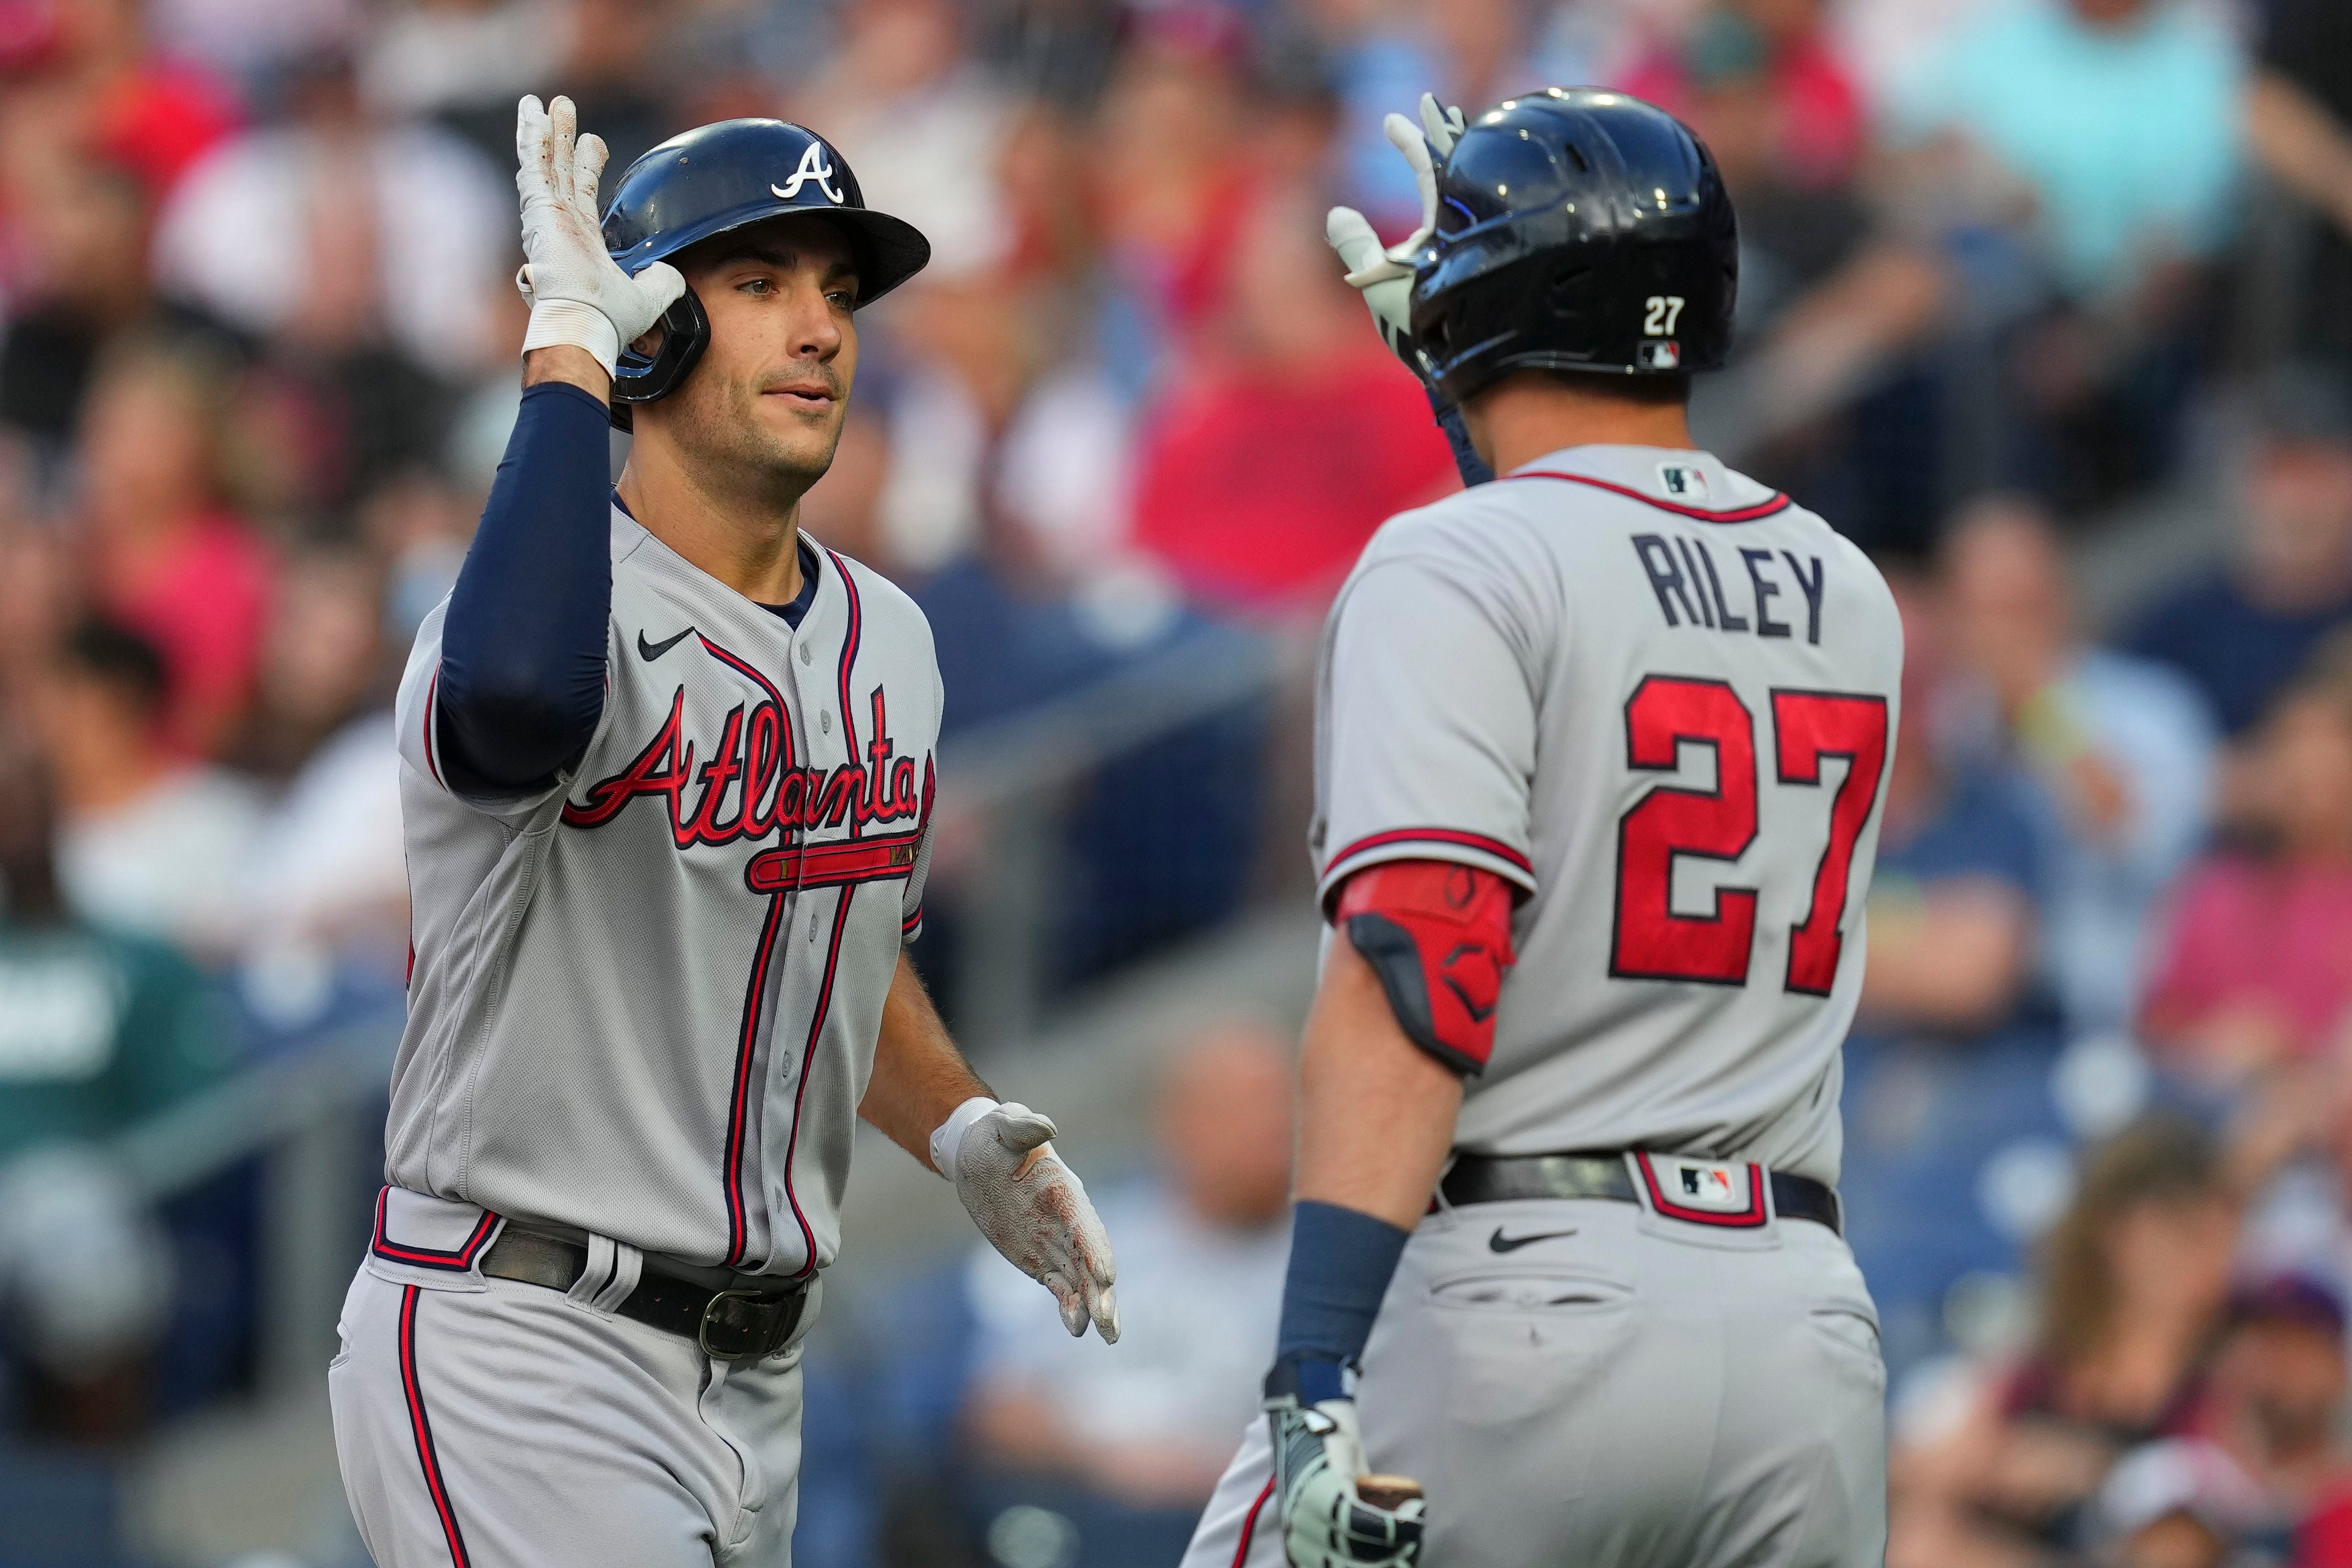 Braves rally for 5-4 win over Phillies on d'Arnaud, Riley homers and  game-ending double play